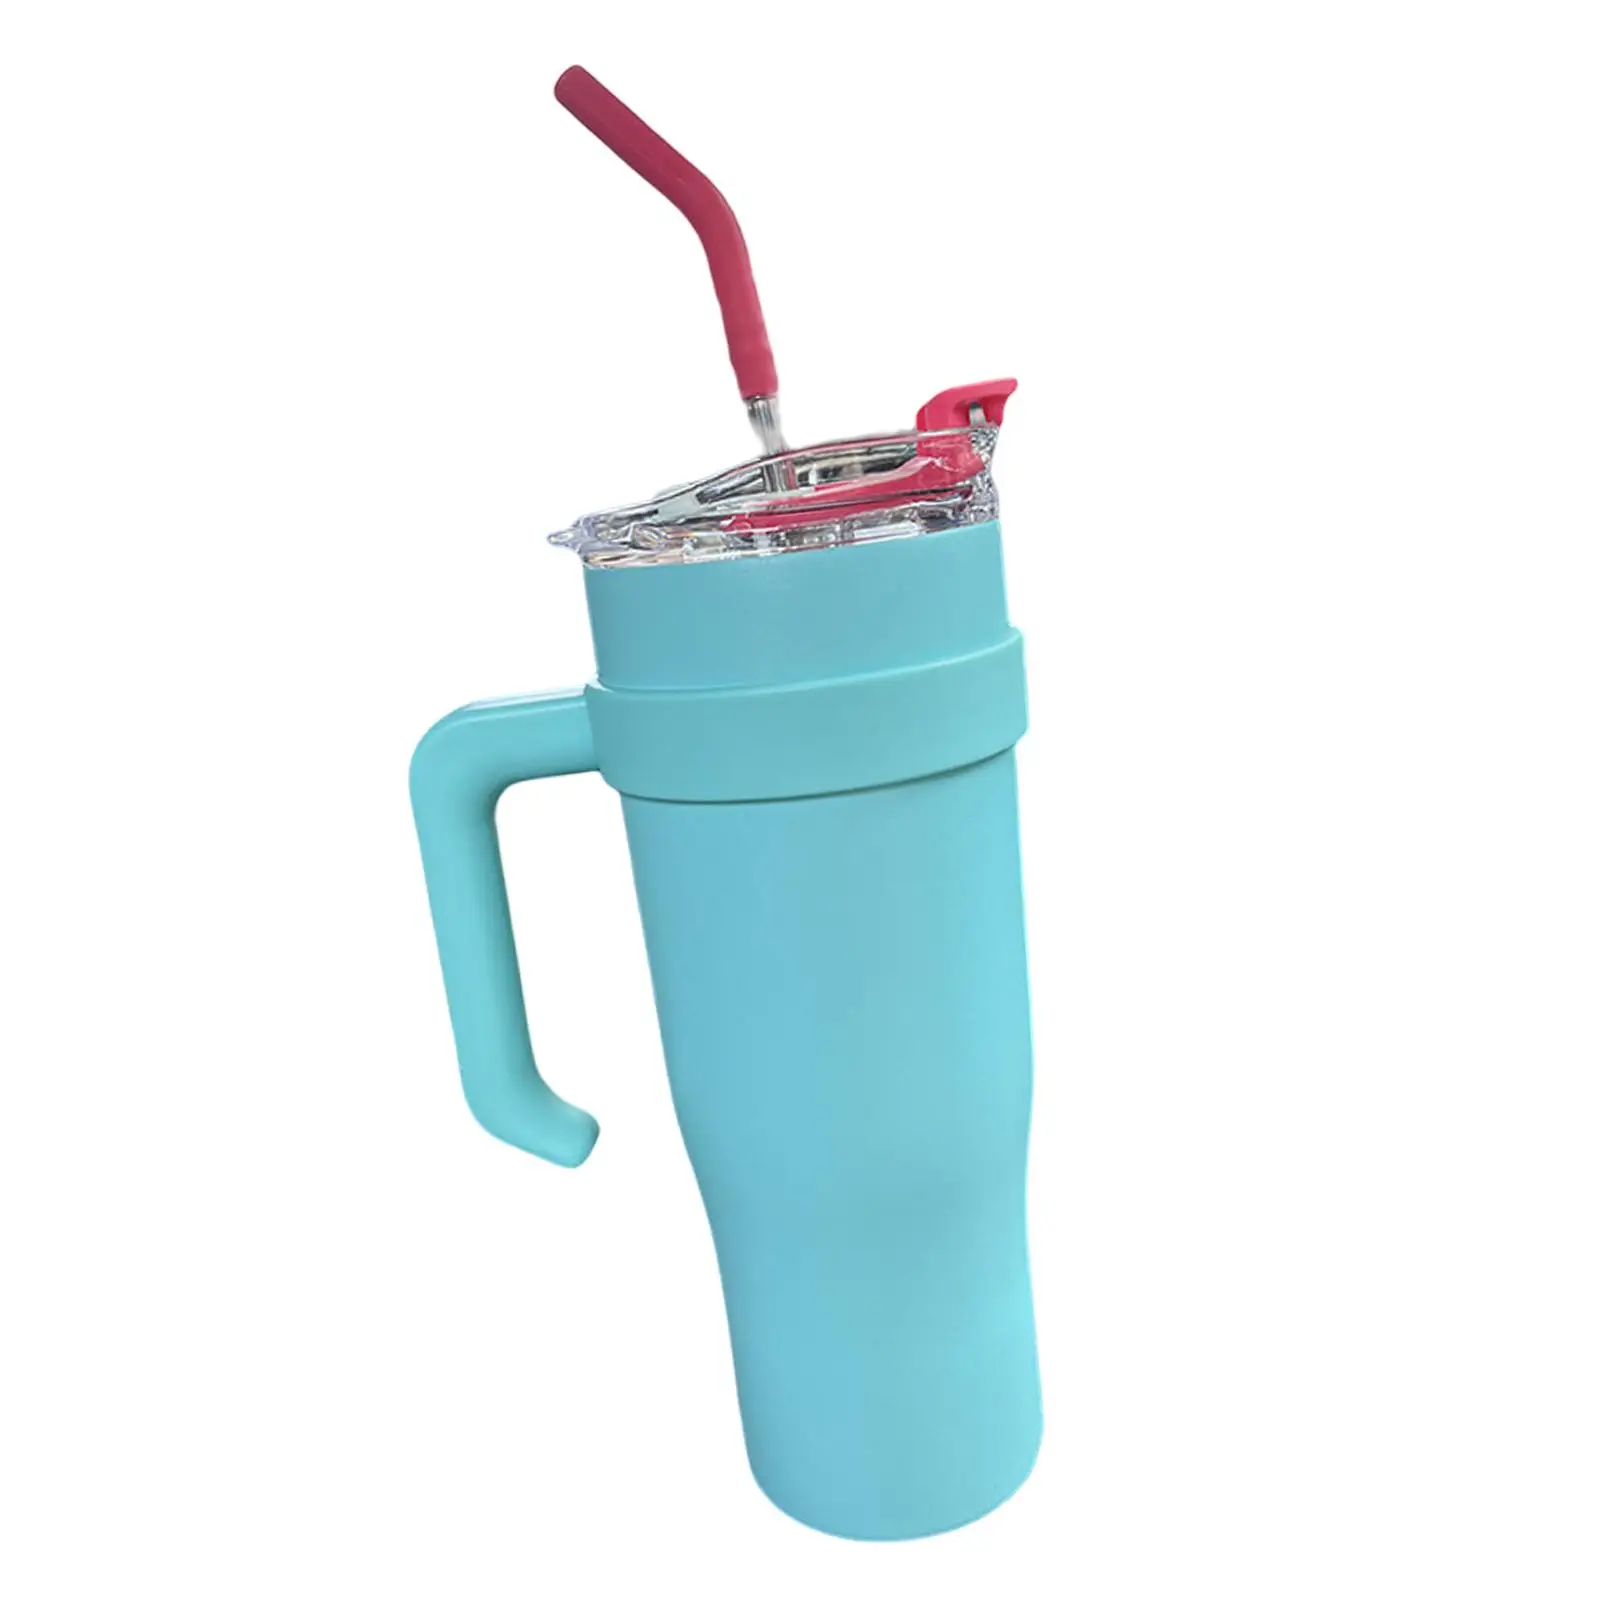 Insulated Sippy Cup with Straw and Lid Coffee Travel Mug for Car ,Travel